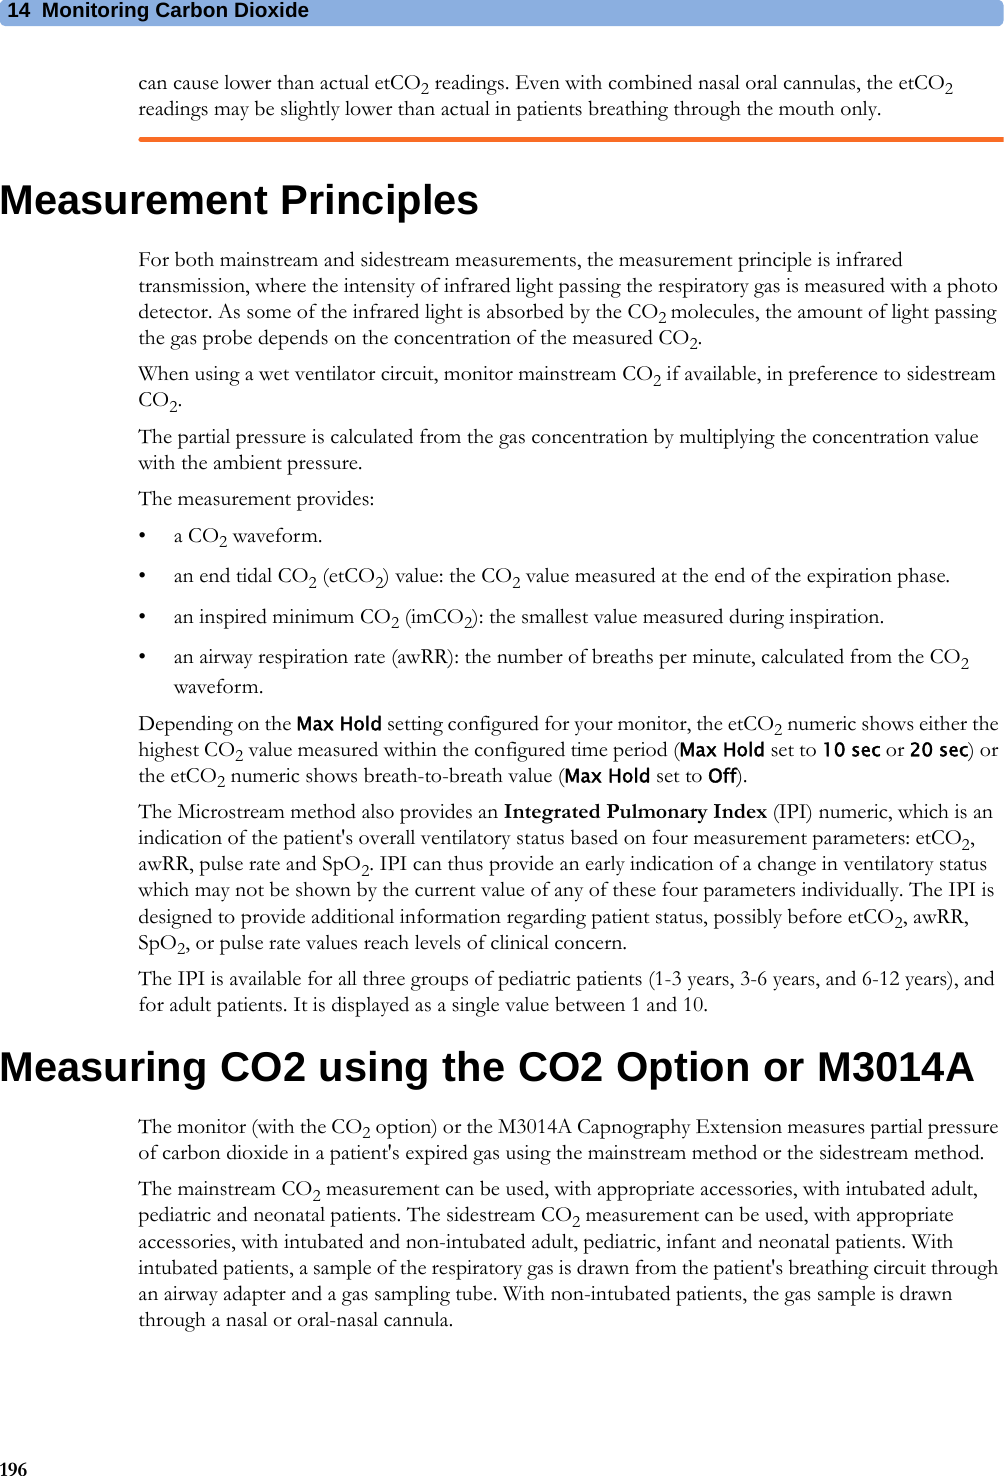 14 Monitoring Carbon Dioxide196can cause lower than actual etCO2 readings. Even with combined nasal oral cannulas, the etCO2 readings may be slightly lower than actual in patients breathing through the mouth only.Measurement PrinciplesFor both mainstream and sidestream measurements, the measurement principle is infrared transmission, where the intensity of infrared light passing the respiratory gas is measured with a photo detector. As some of the infrared light is absorbed by the CO2 molecules, the amount of light passing the gas probe depends on the concentration of the measured CO2.When using a wet ventilator circuit, monitor mainstream CO2 if available, in preference to sidestream CO2.The partial pressure is calculated from the gas concentration by multiplying the concentration value with the ambient pressure.The measurement provides:•a CO2 waveform.•an end tidal CO2 (etCO2) value: the CO2 value measured at the end of the expiration phase.• an inspired minimum CO2 (imCO2): the smallest value measured during inspiration.• an airway respiration rate (awRR): the number of breaths per minute, calculated from the CO2 waveform.Depending on the Max Hold setting configured for your monitor, the etCO2 numeric shows either the highest CO2 value measured within the configured time period (Max Hold set to 10 sec or 20 sec) or the etCO2 numeric shows breath-to-breath value (Max Hold set to Off).The Microstream method also provides an Integrated Pulmonary Index (IPI) numeric, which is an indication of the patient&apos;s overall ventilatory status based on four measurement parameters: etCO2, awRR, pulse rate and SpO2. IPI can thus provide an early indication of a change in ventilatory status which may not be shown by the current value of any of these four parameters individually. The IPI is designed to provide additional information regarding patient status, possibly before etCO2, awRR, SpO2, or pulse rate values reach levels of clinical concern.The IPI is available for all three groups of pediatric patients (1-3 years, 3-6 years, and 6-12 years), and for adult patients. It is displayed as a single value between 1 and 10.Measuring CO2 using the CO2 Option or M3014AThe monitor (with the CO2 option) or the M3014A Capnography Extension measures partial pressure of carbon dioxide in a patient&apos;s expired gas using the mainstream method or the sidestream method.The mainstream CO2 measurement can be used, with appropriate accessories, with intubated adult, pediatric and neonatal patients. The sidestream CO2 measurement can be used, with appropriate accessories, with intubated and non-intubated adult, pediatric, infant and neonatal patients. With intubated patients, a sample of the respiratory gas is drawn from the patient&apos;s breathing circuit through an airway adapter and a gas sampling tube. With non-intubated patients, the gas sample is drawn through a nasal or oral-nasal cannula.